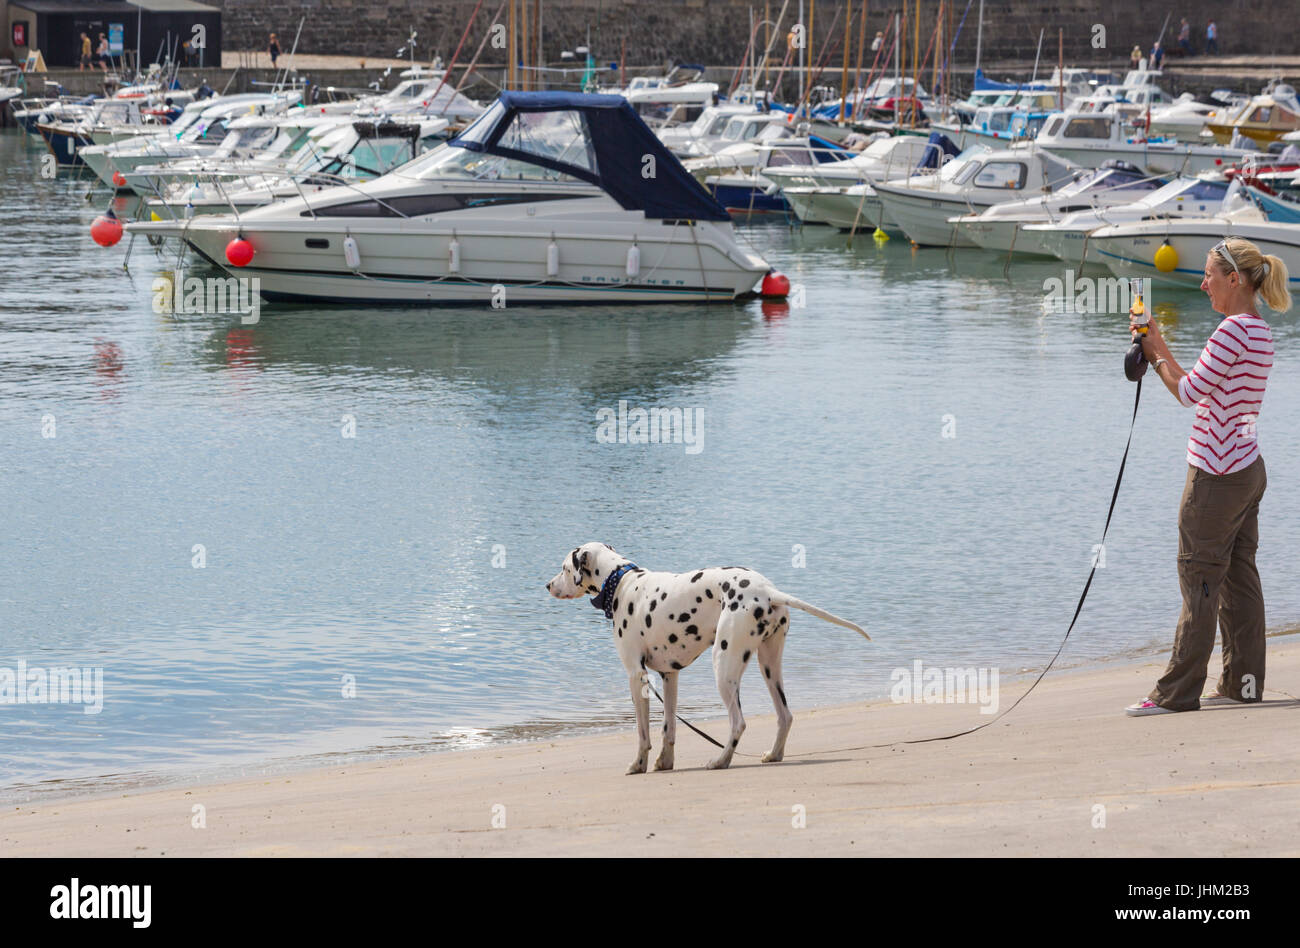 Woman with Dalmatian dog taking photo in Lyme Regis harbour at Lyme Regis, Dorset in July Stock Photo